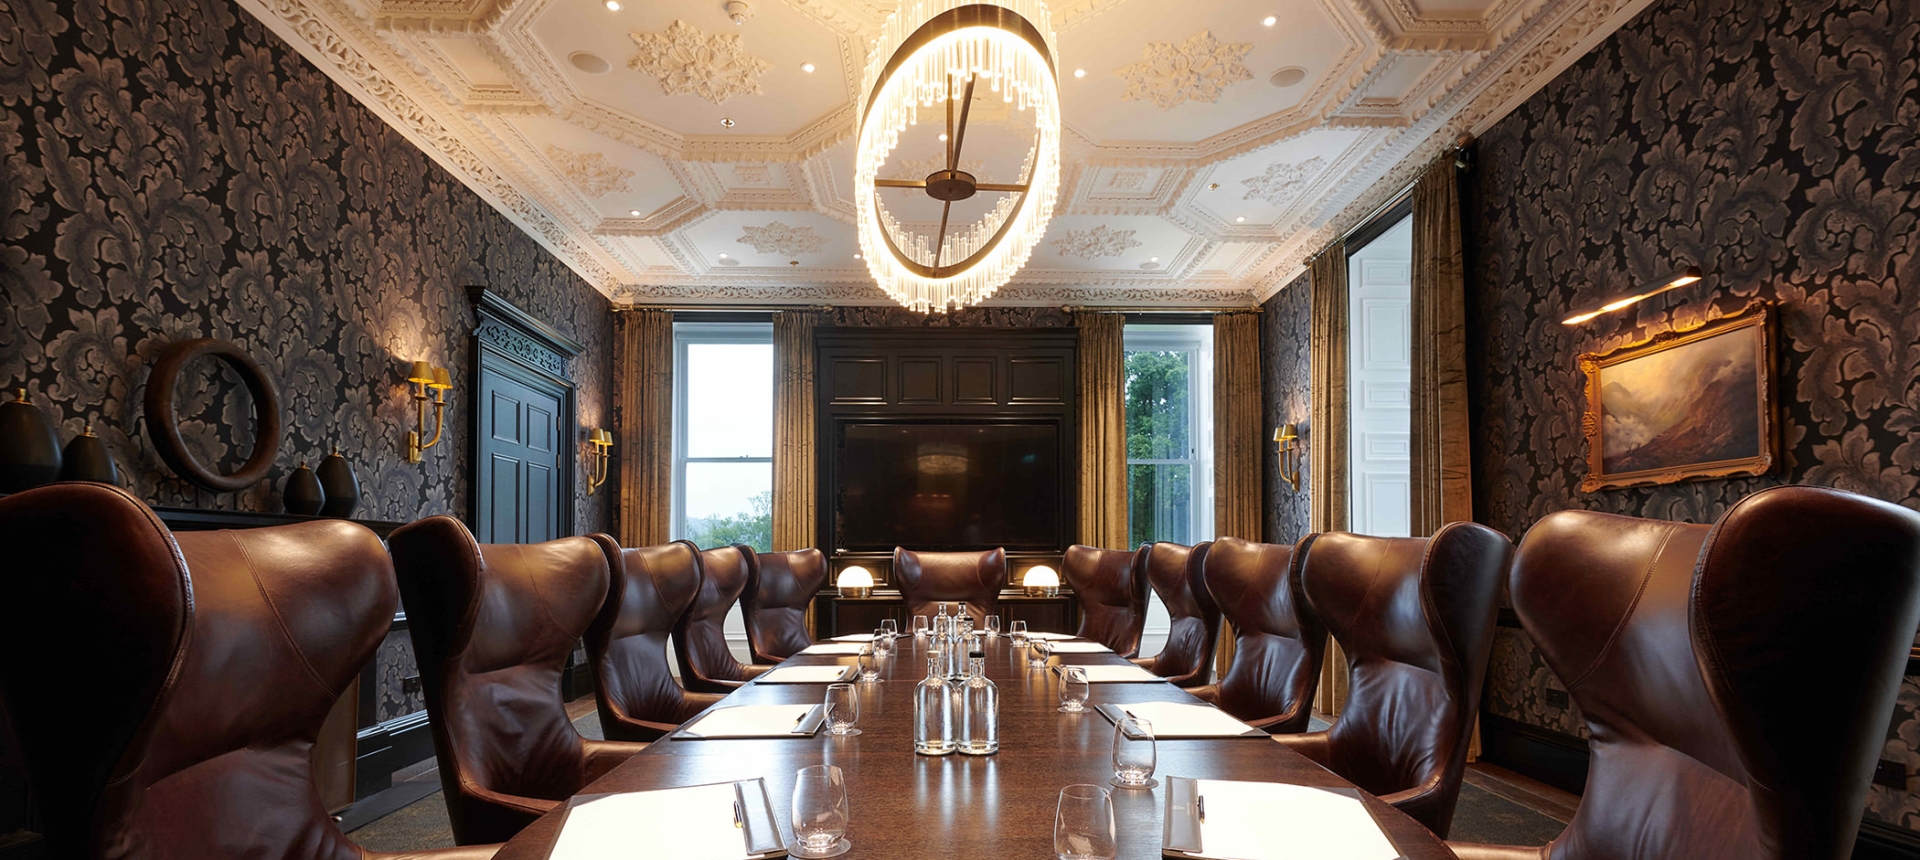 Large round table surrounded by brown leather chairs and a large lighting fixture above